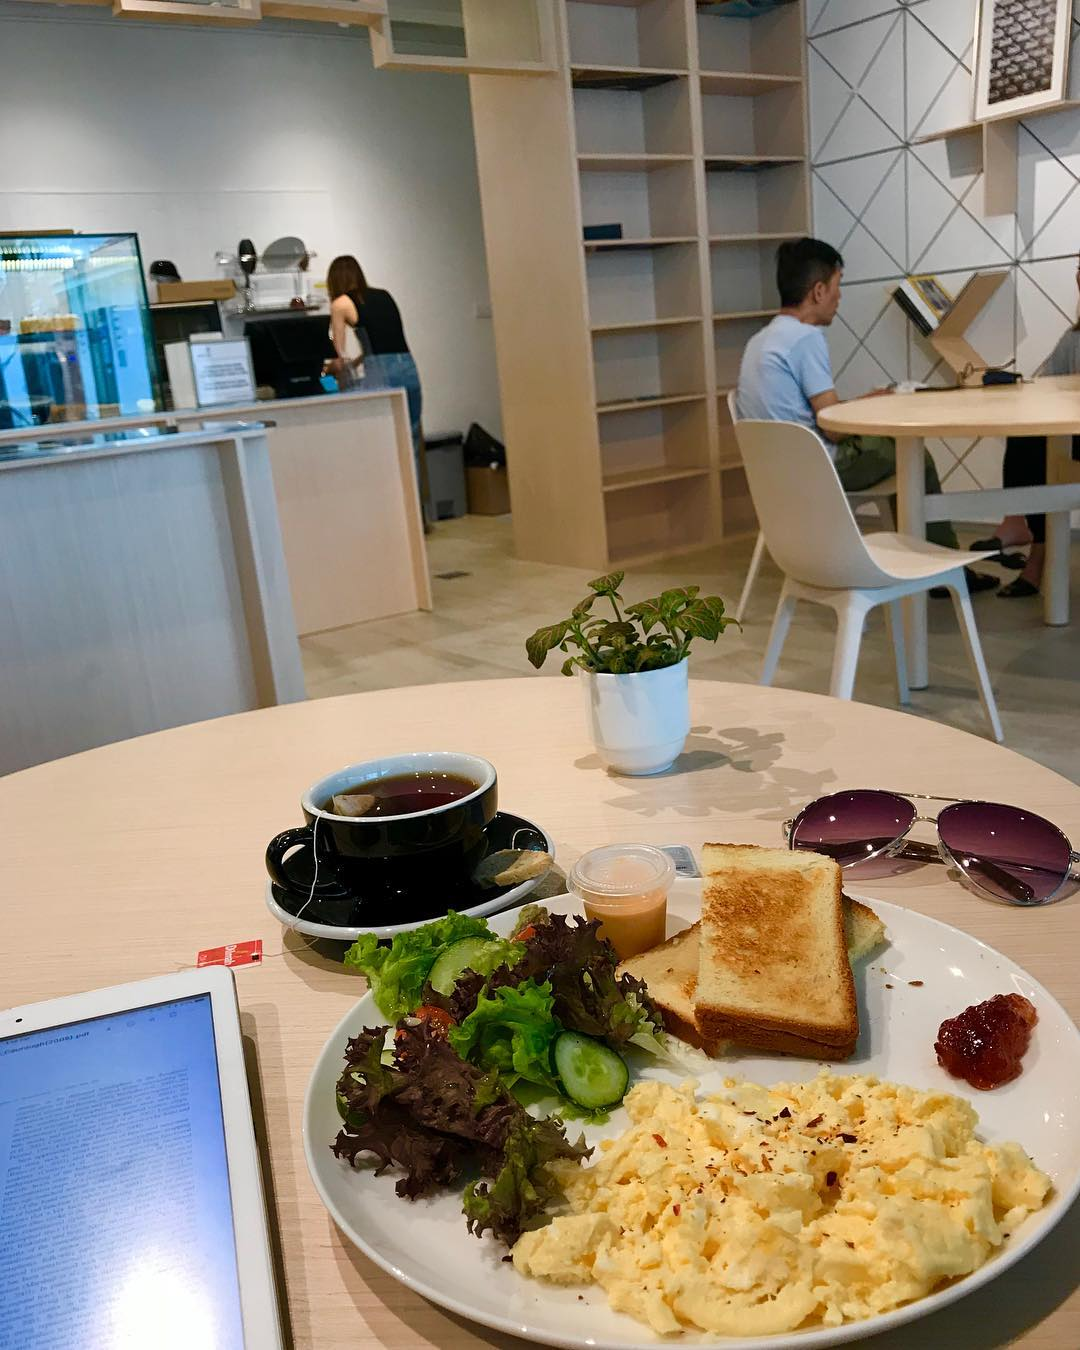 Feb 2018 cafes and restaurants (13) - Seeds Cafe food and interior